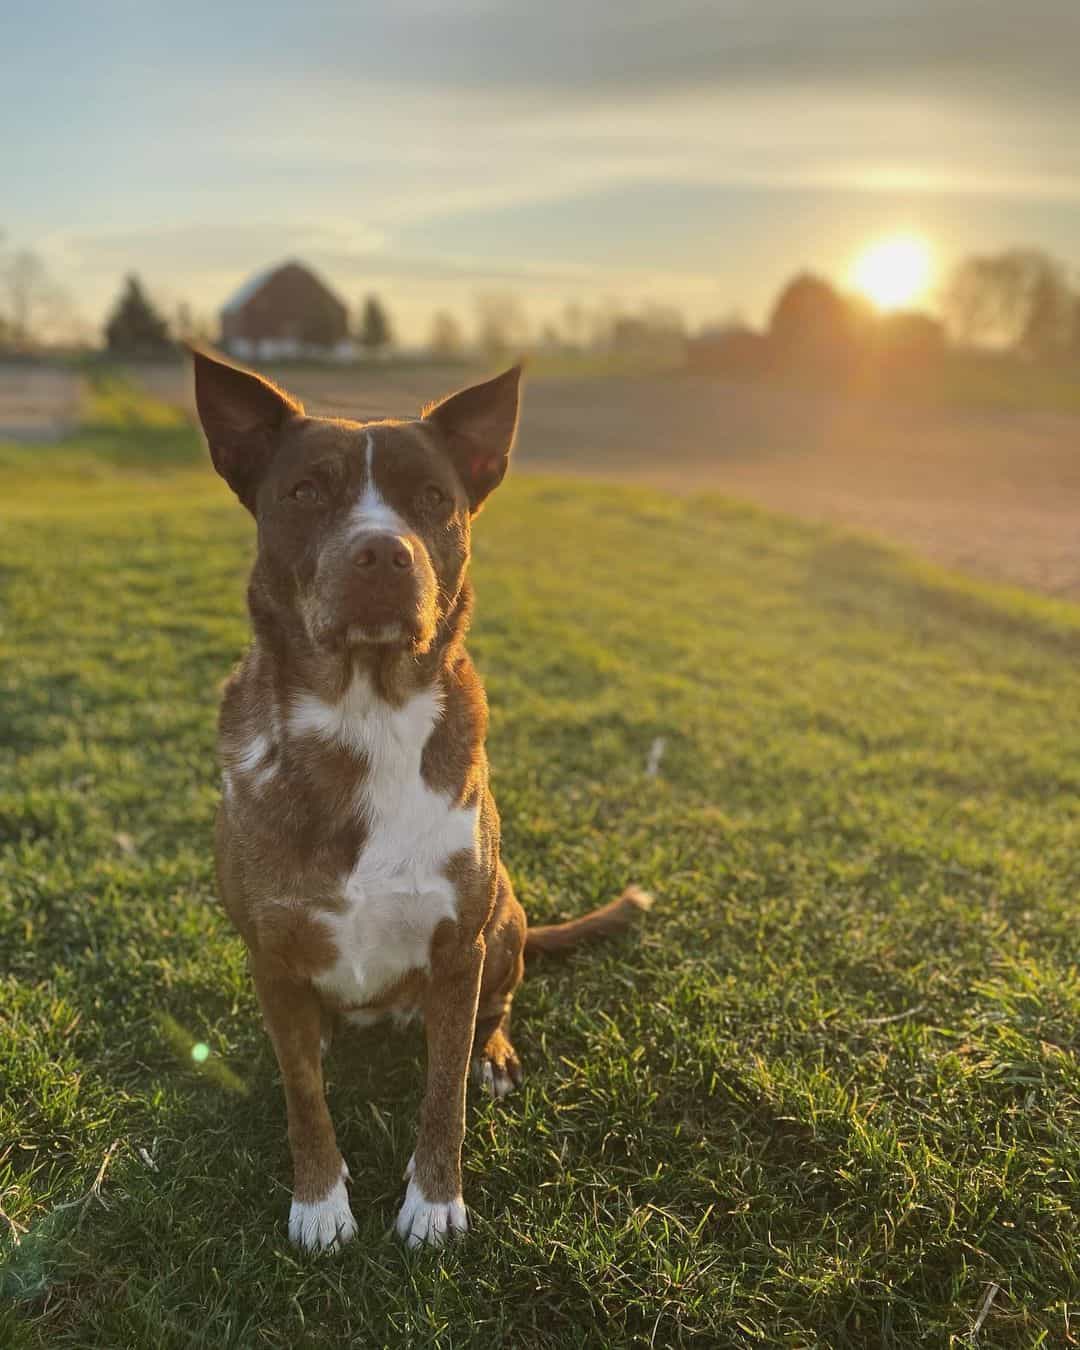 Catahoula Border Collie sitting in a field